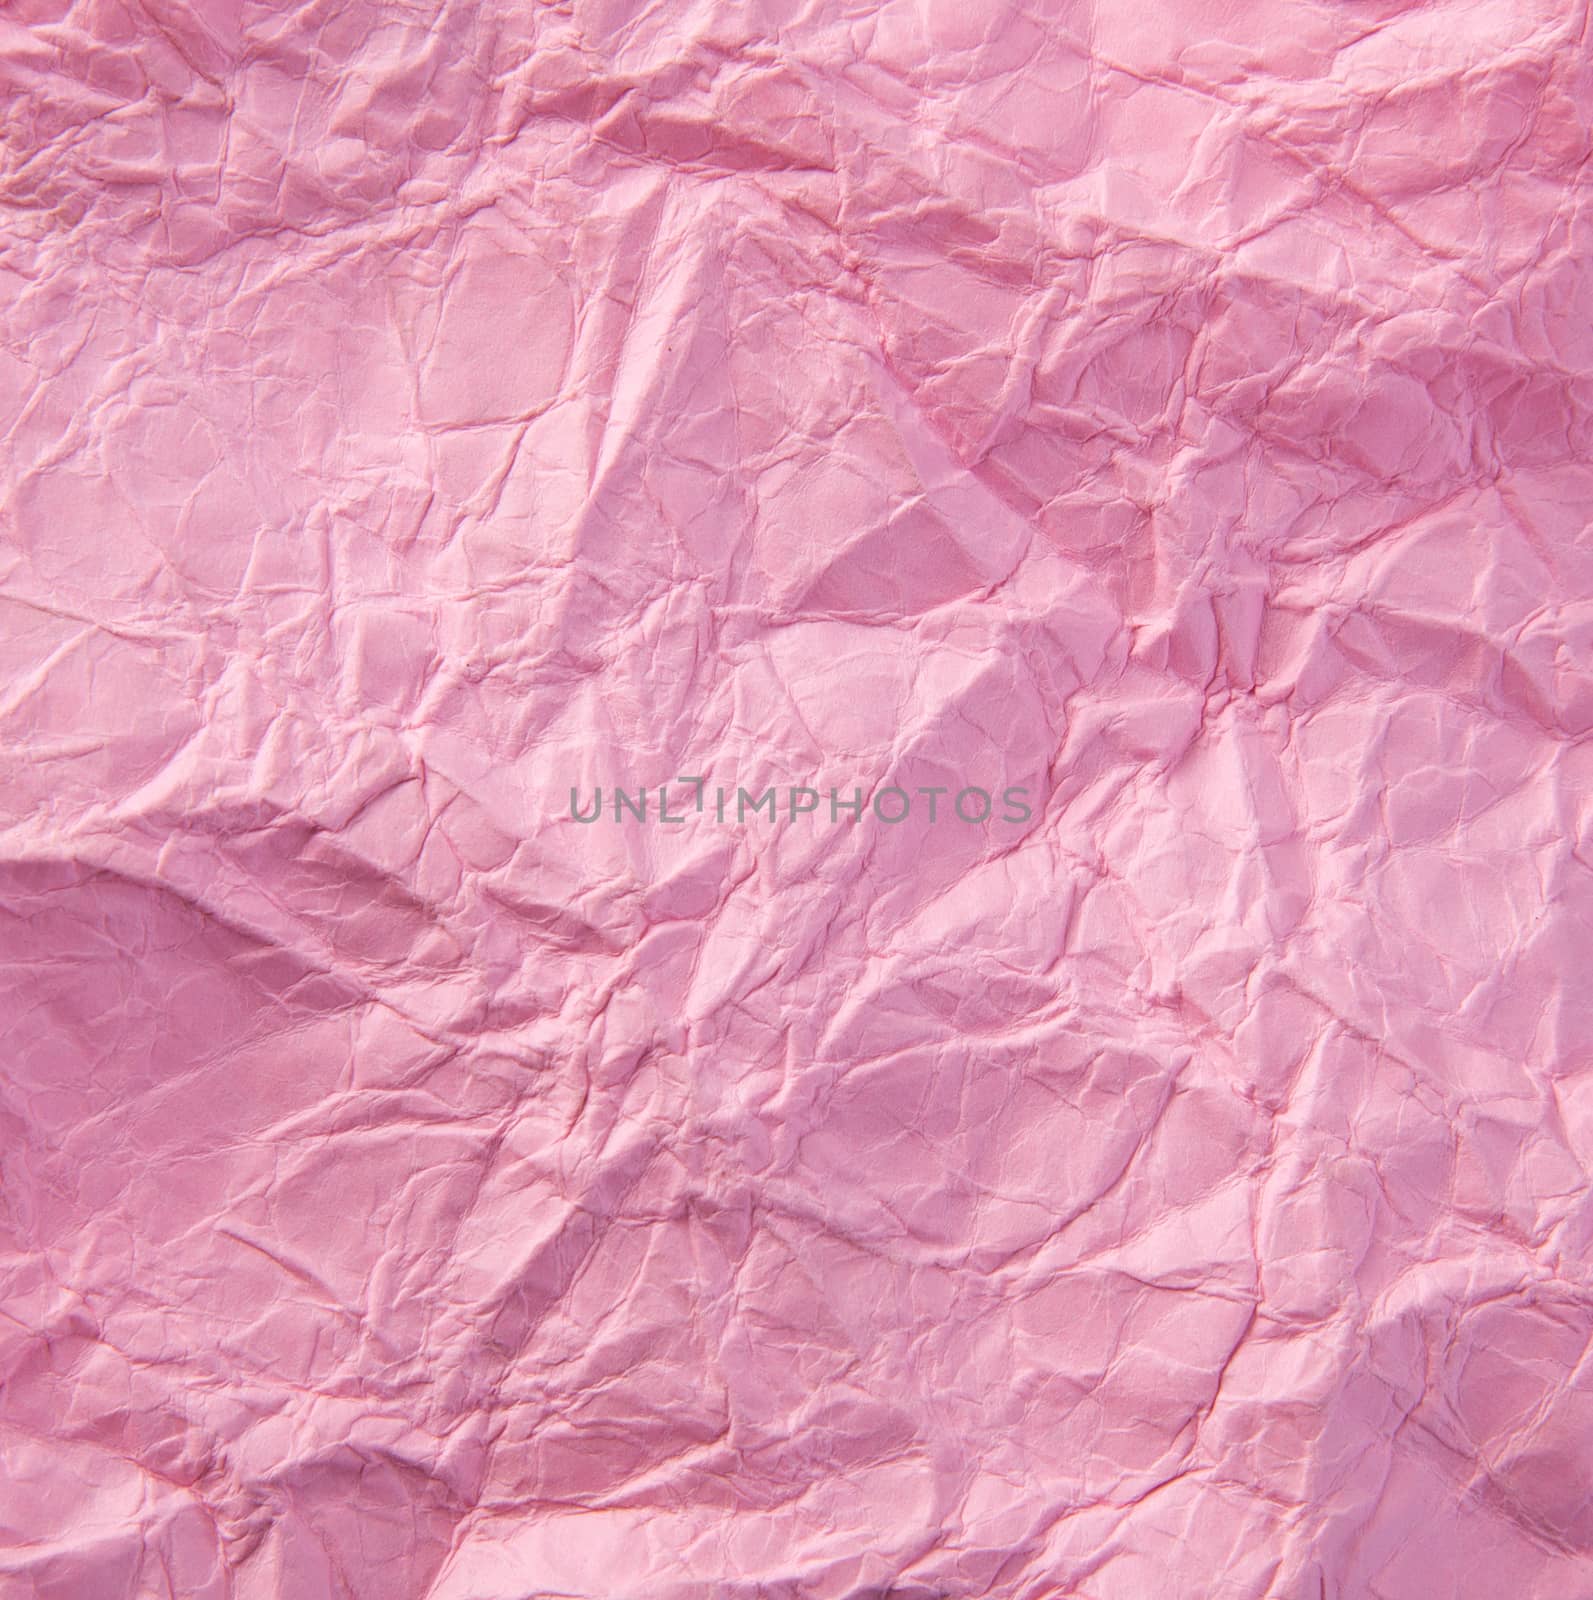 Crumpled paper texture, background with copy space